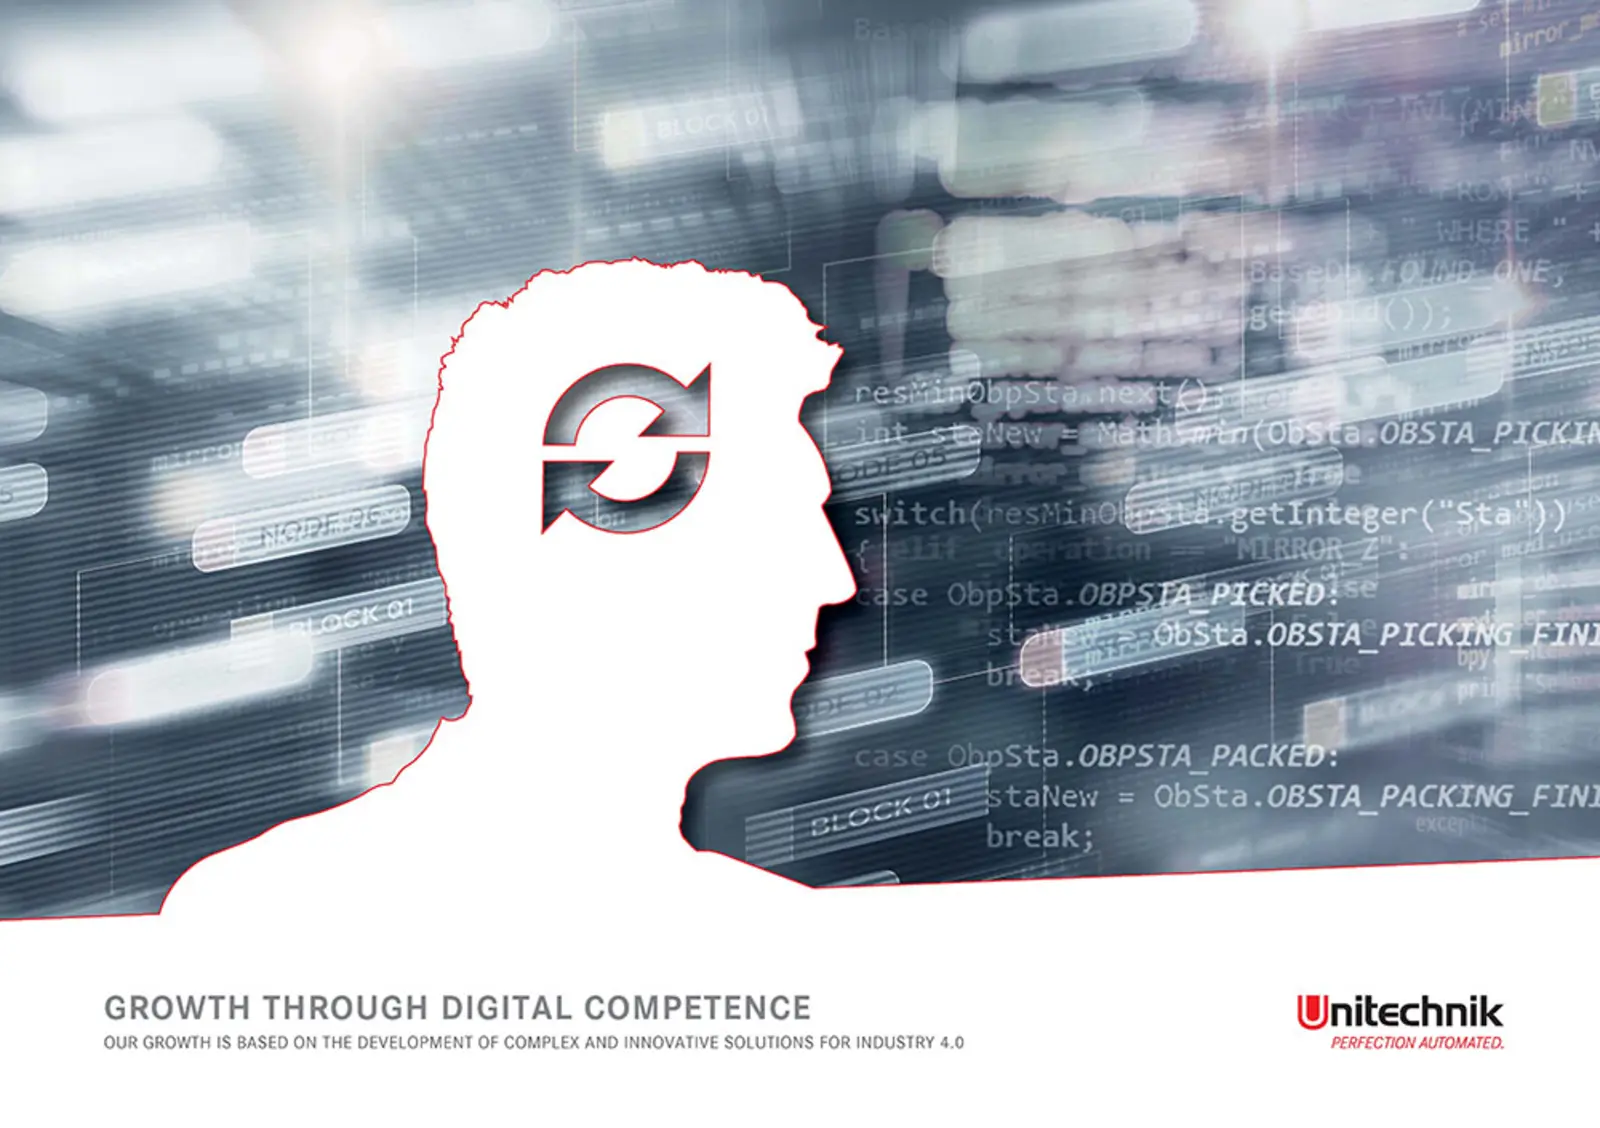 Growth through digital competence